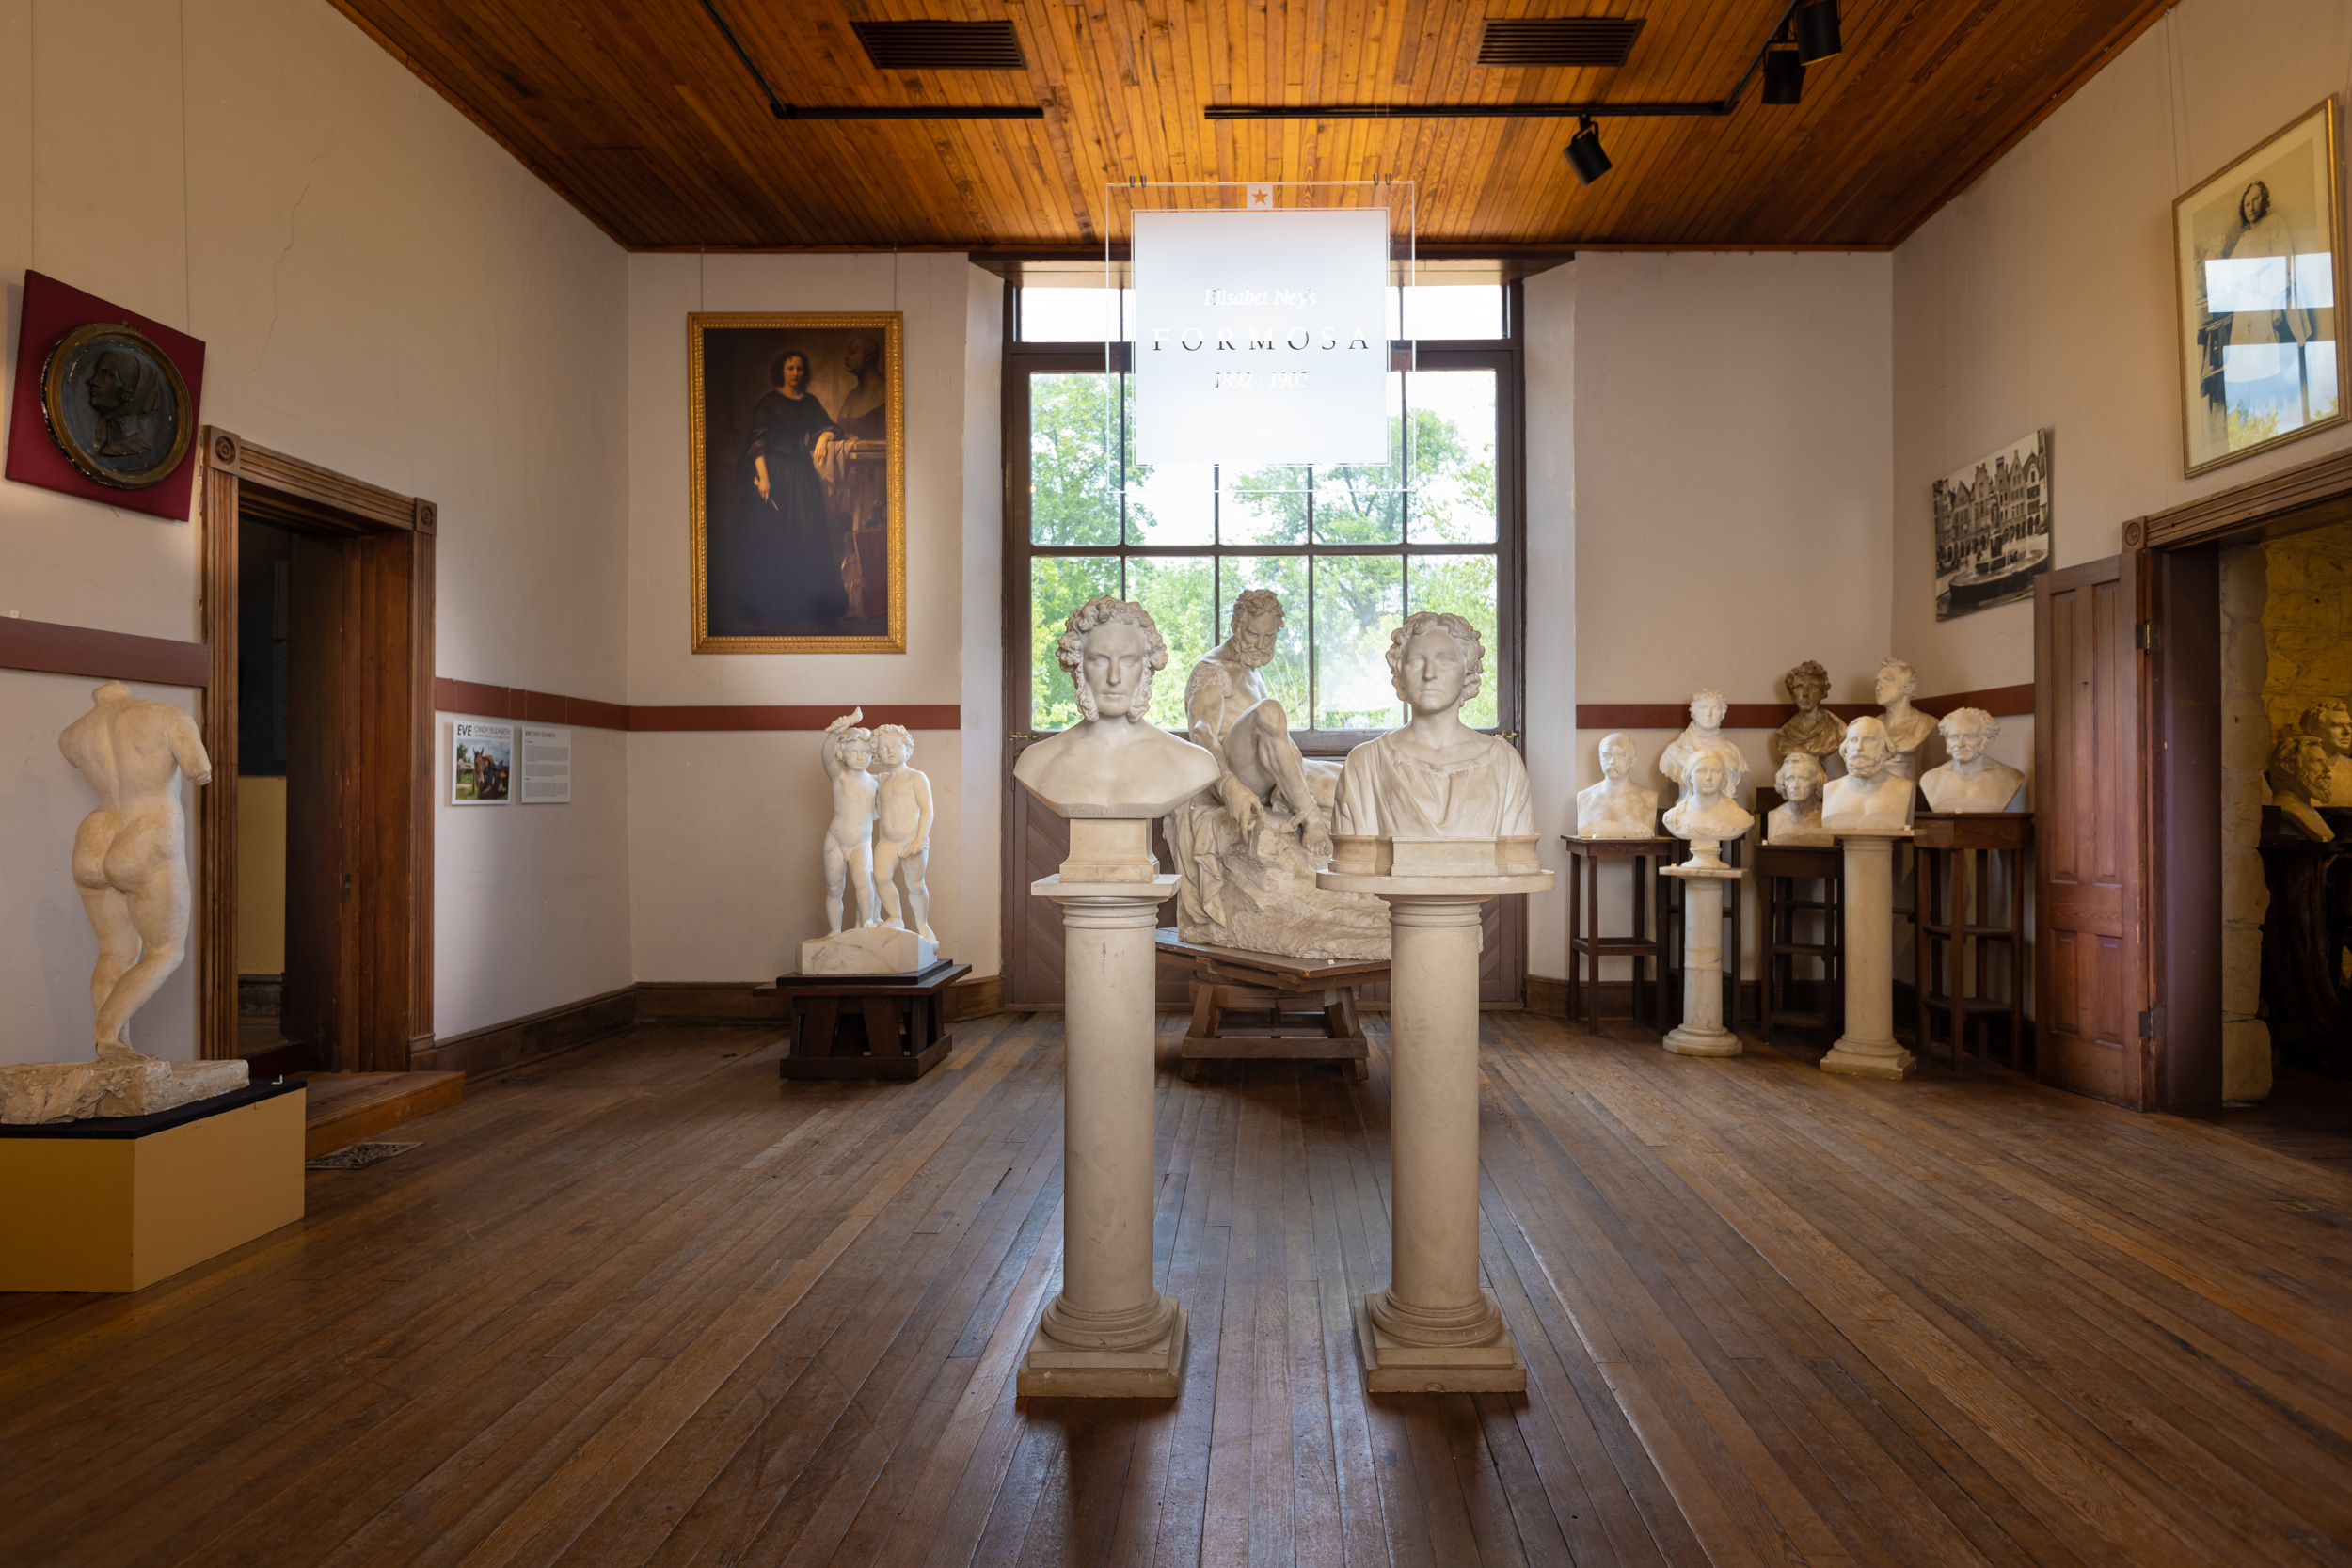 The main entrance of the museum shows two busts in foreground and other toward the back of the room, which has wood floors and a large window. A sign reading "Formosa" hangs in front of window. 